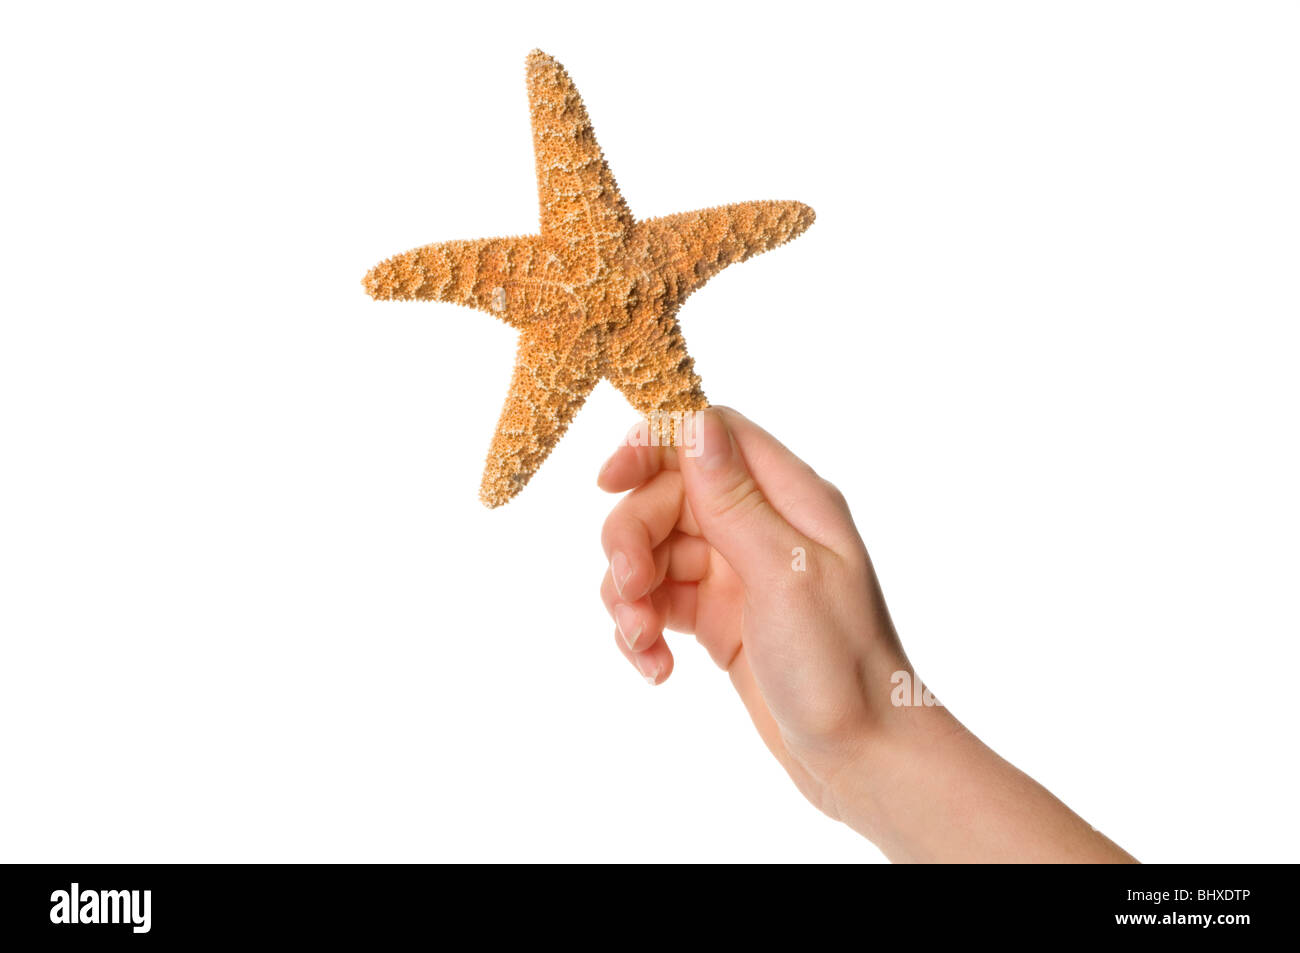 Hand holding starfish Banque D'Images